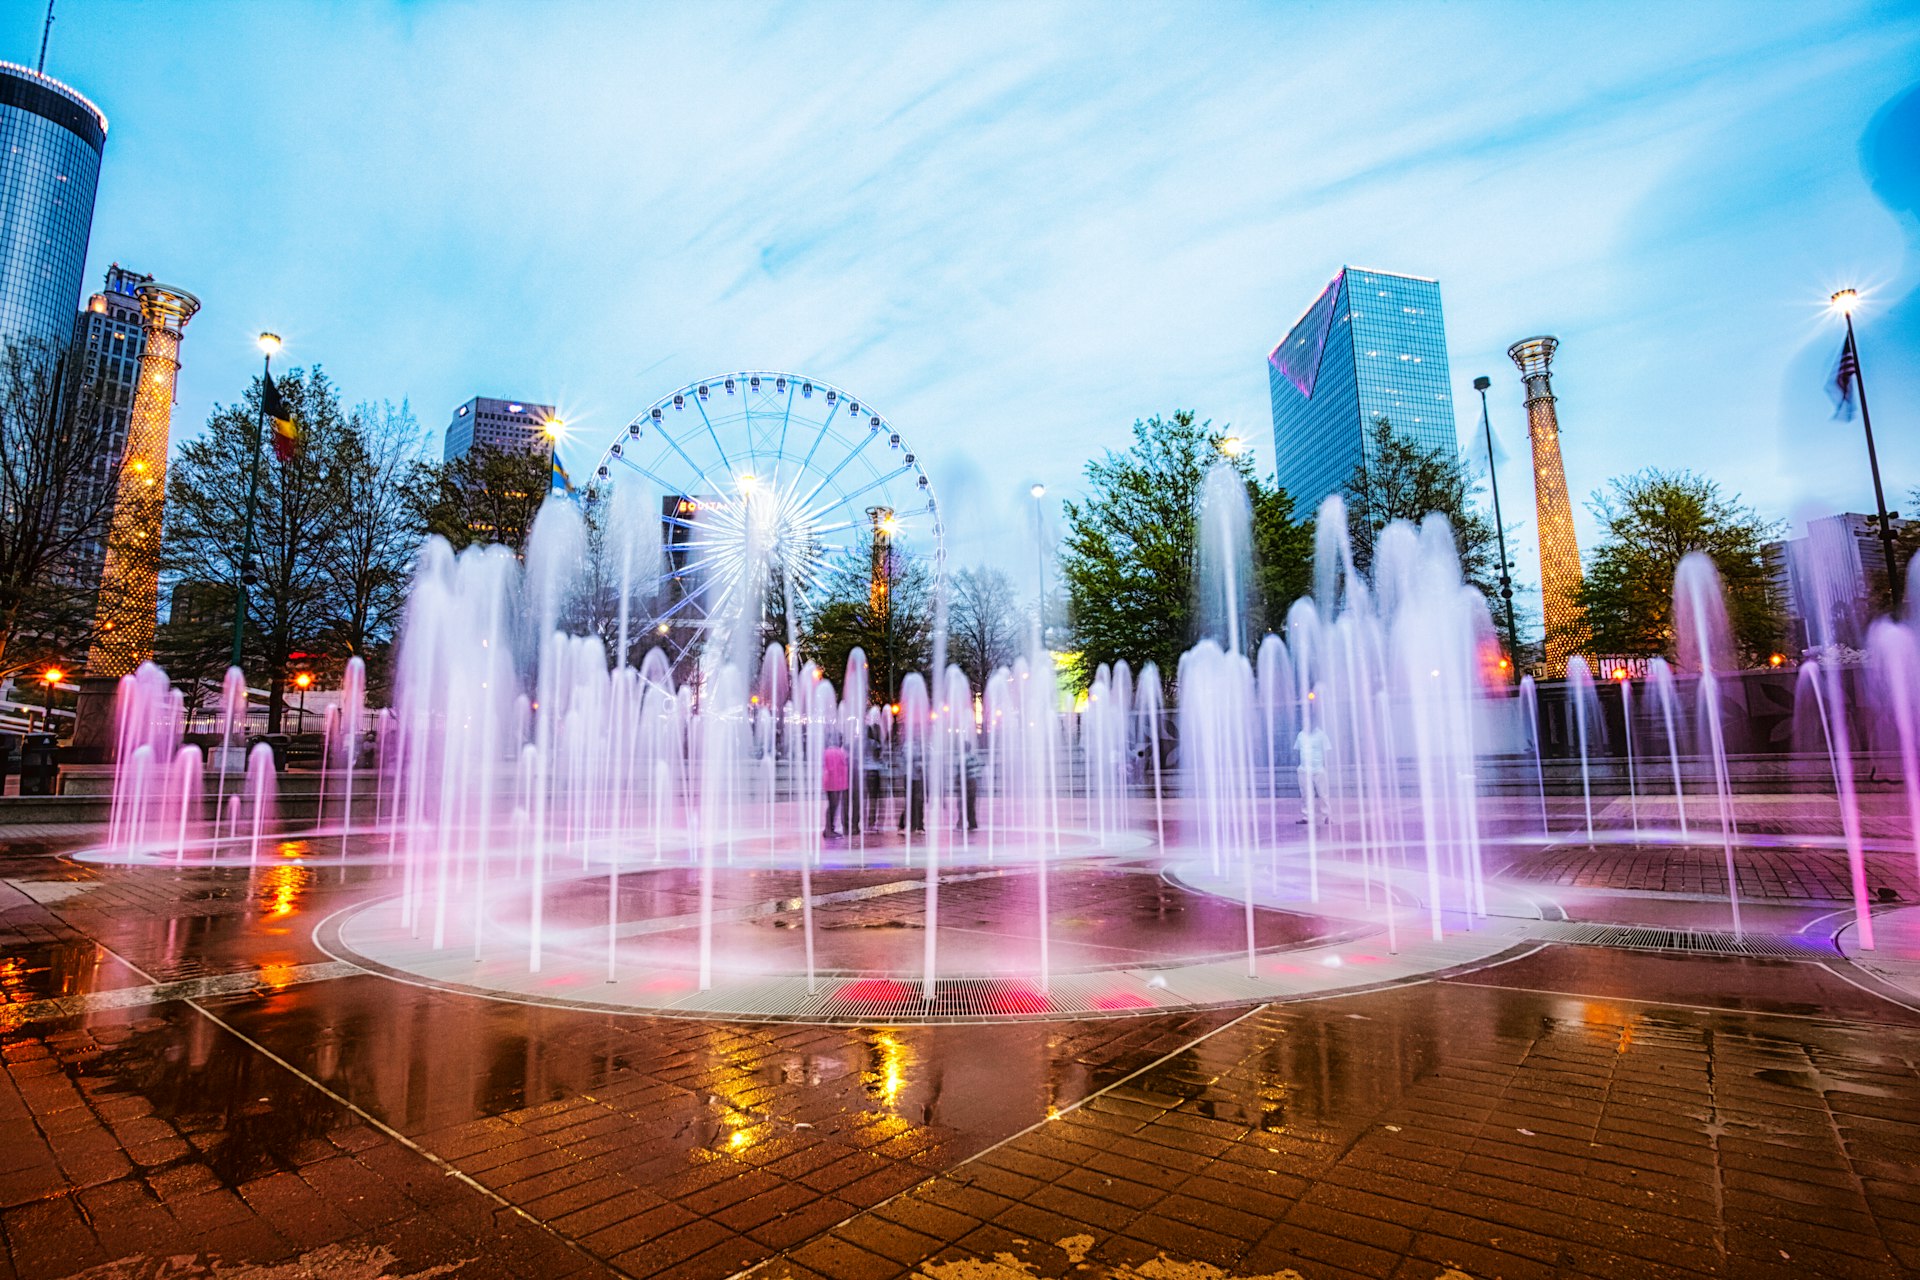 The colorfully lit fountain at Centennial Olympic Park with a Ferris wheel in the background